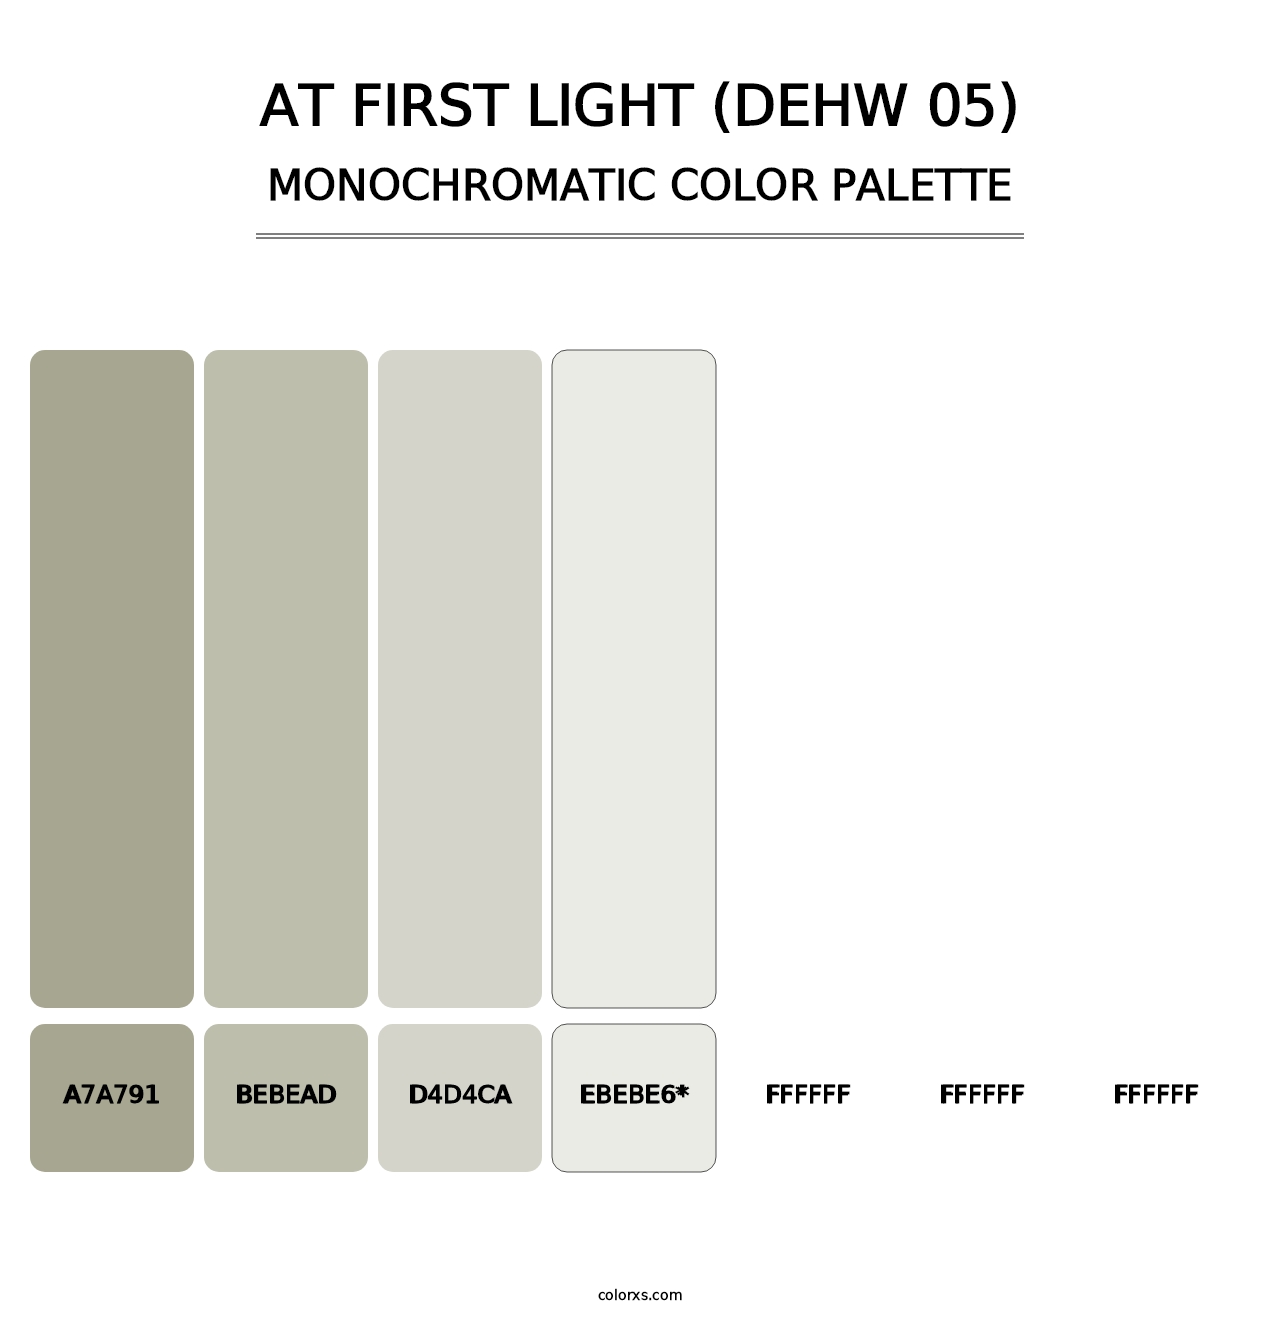 At First Light (DEHW 05) - Monochromatic Color Palette